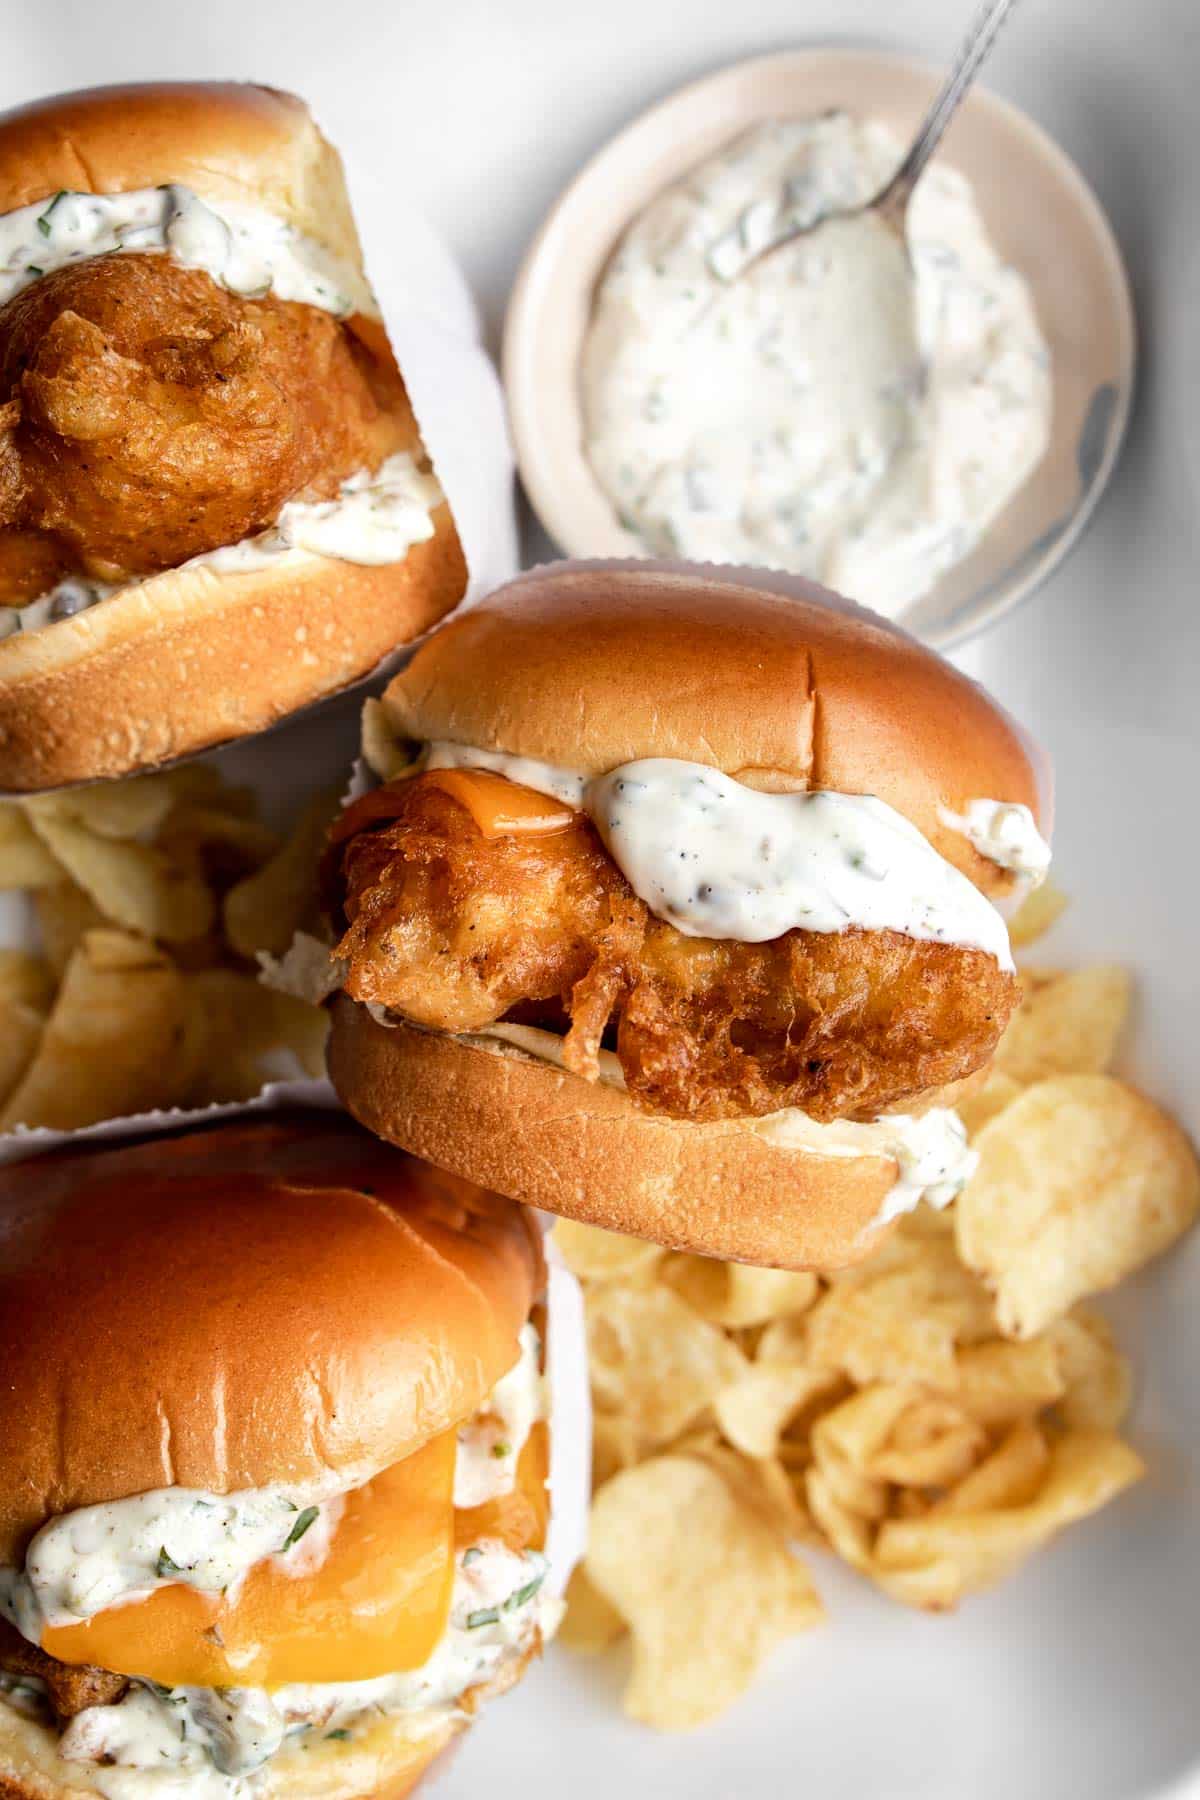 Three fried fish sandwiches (filet-o-fish) served with tartar sauce and chips.